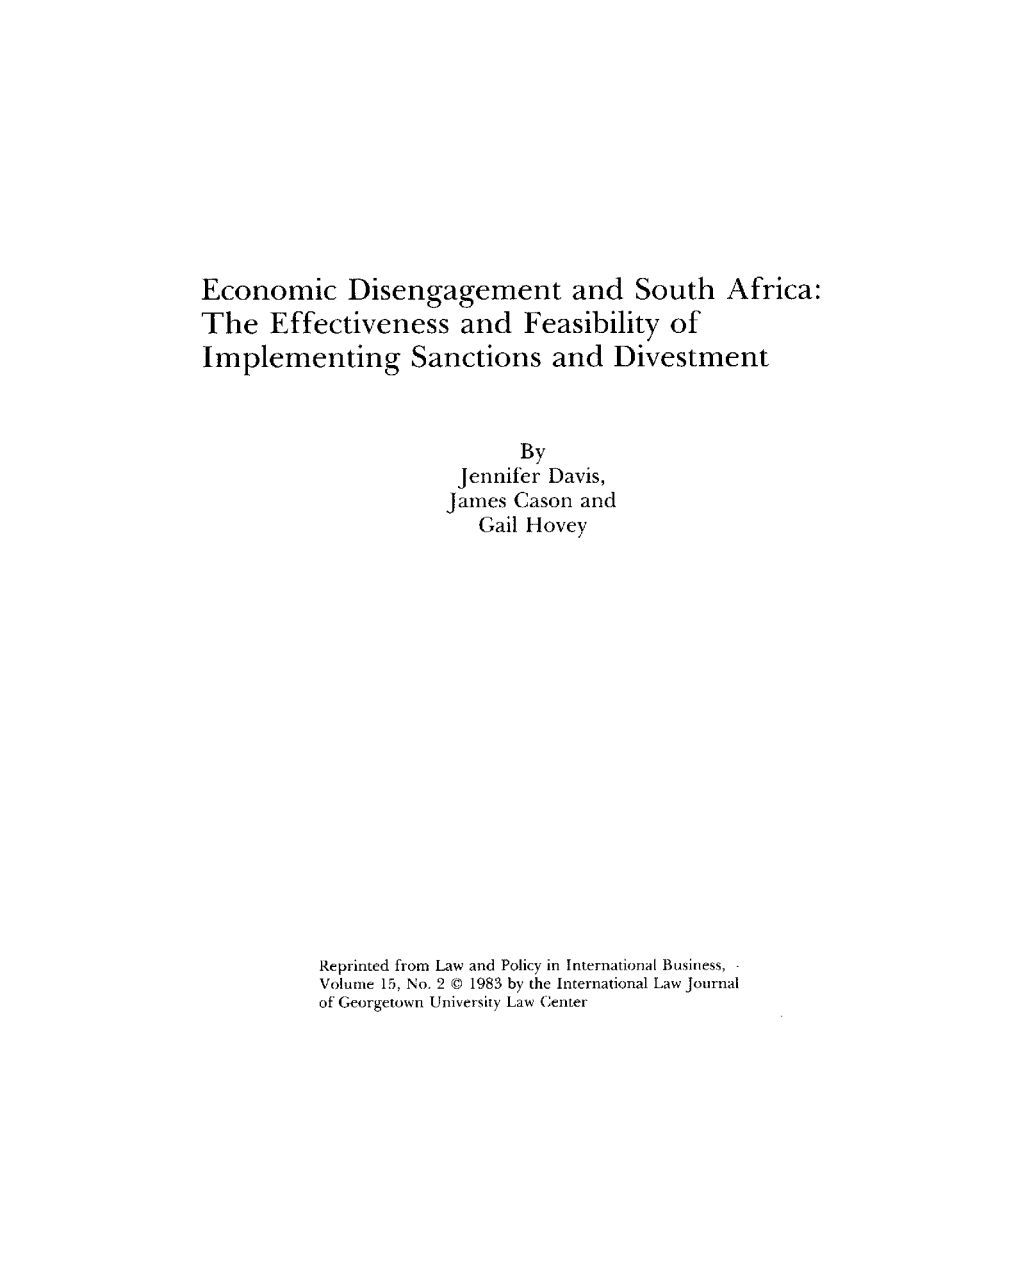 Economic Disengagement and South Africa: the Effectiveness and Feasibility of Implementing Sanctions and Divestment